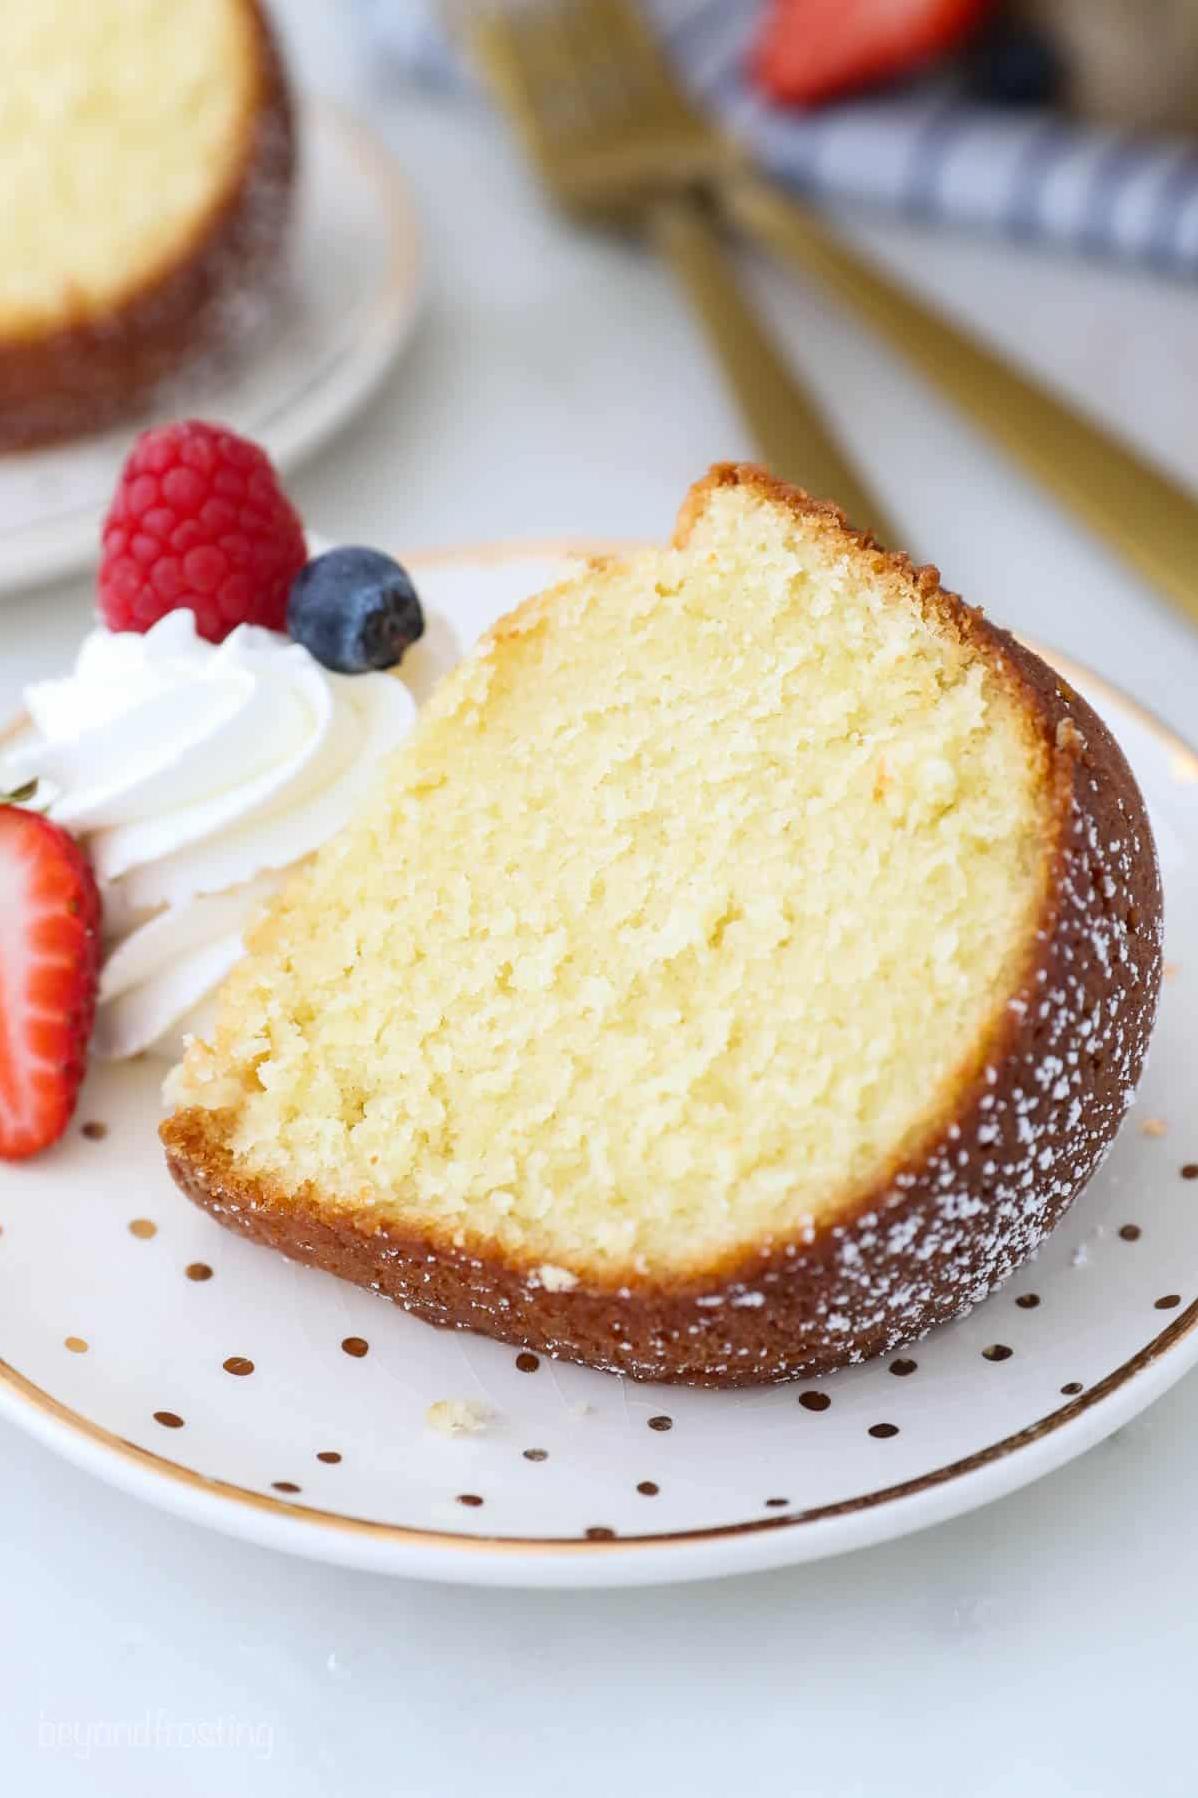  Who knew a cake could be both quick and delicious?